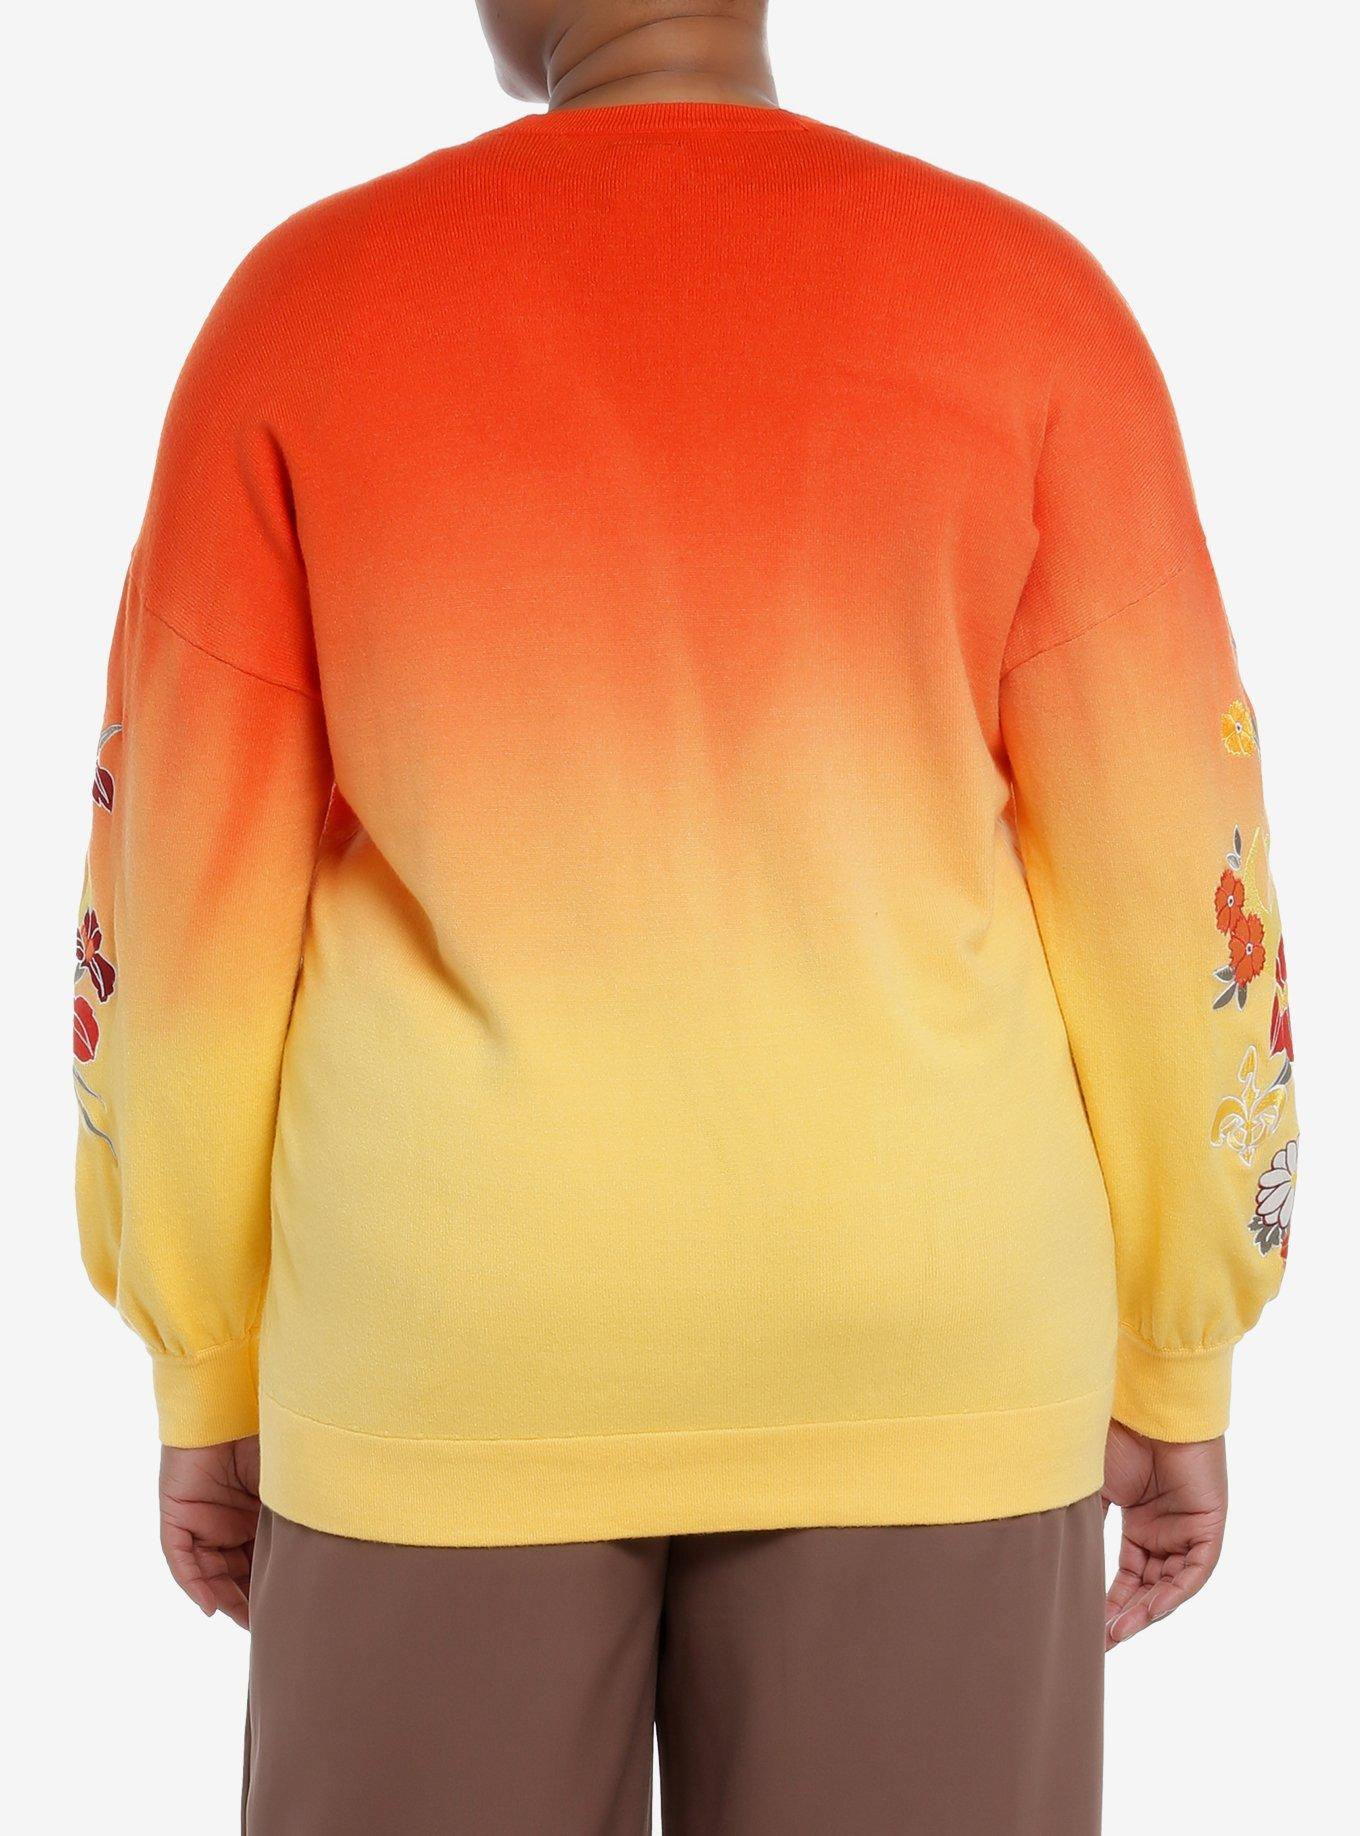 Her Universe Star Wars Padme Amidala Ombre Cardigan Plus Size Her Universe Exclusive, MULTICOLOR OMBRE, alternate